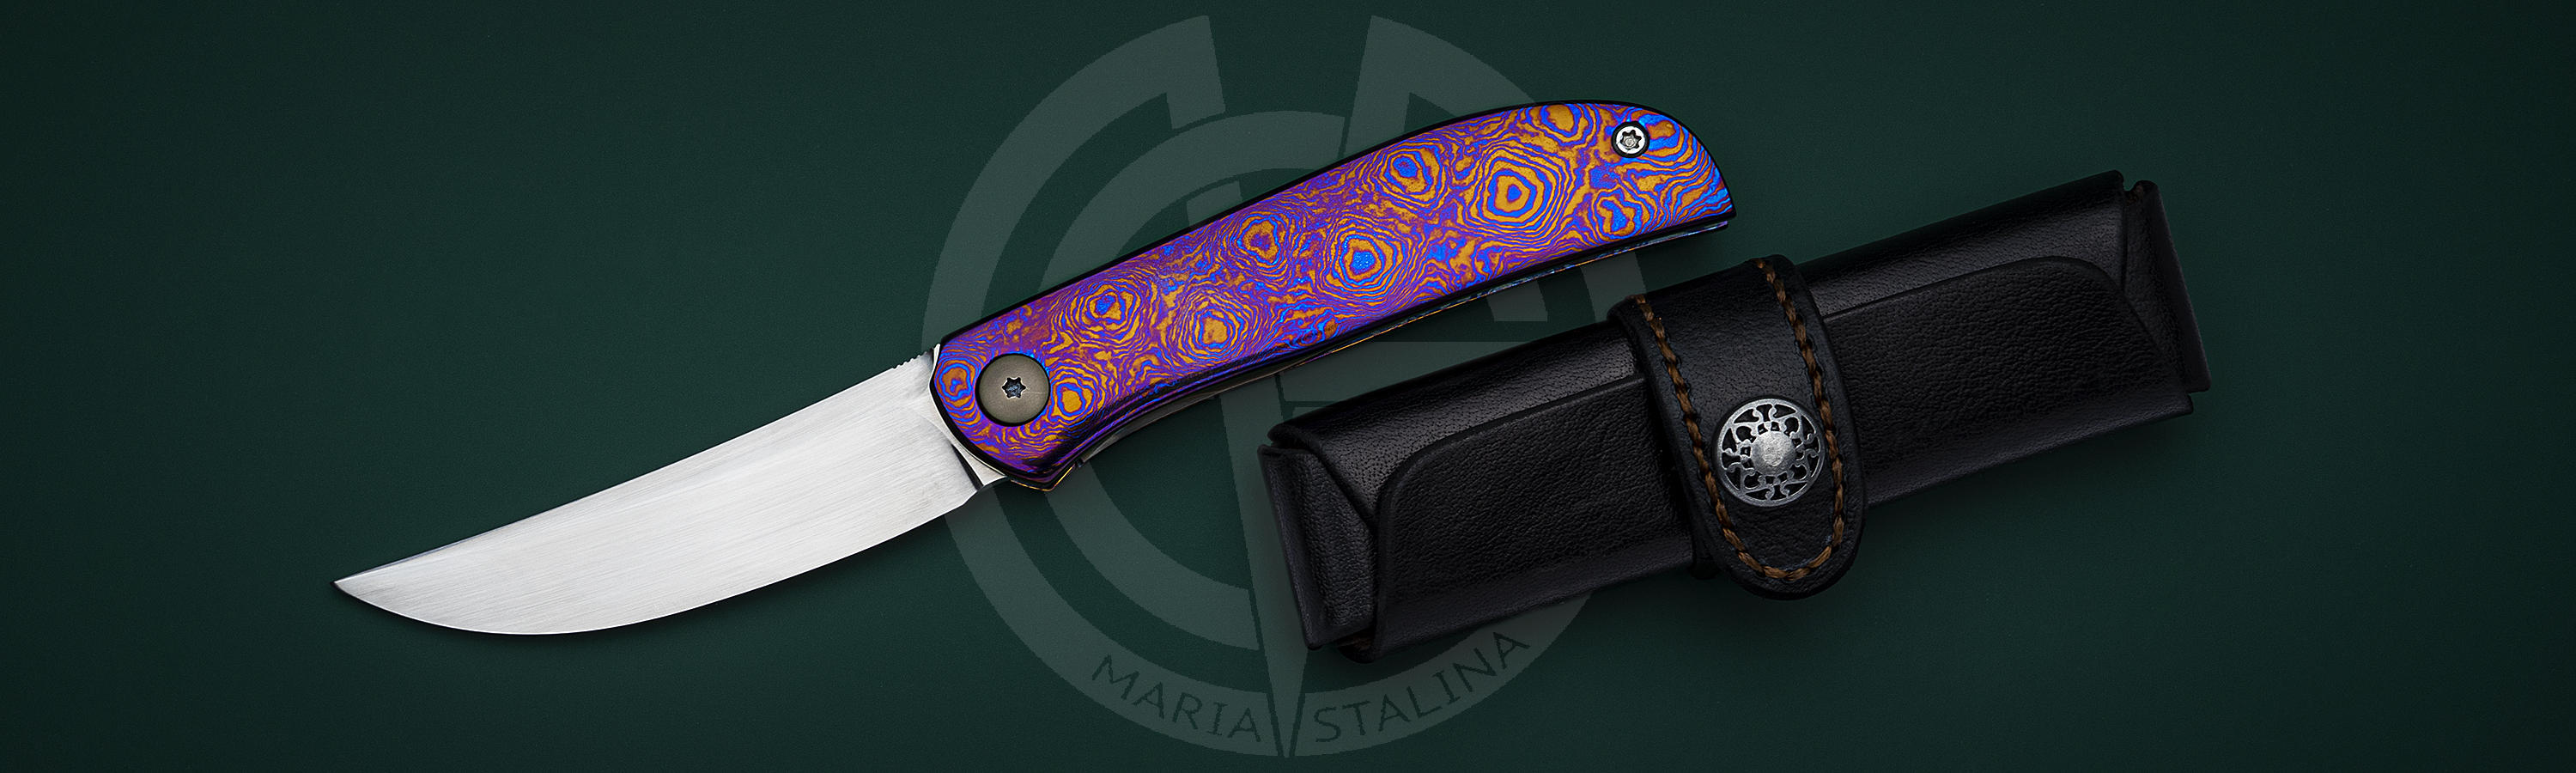 Persian shape and timascus on the handle